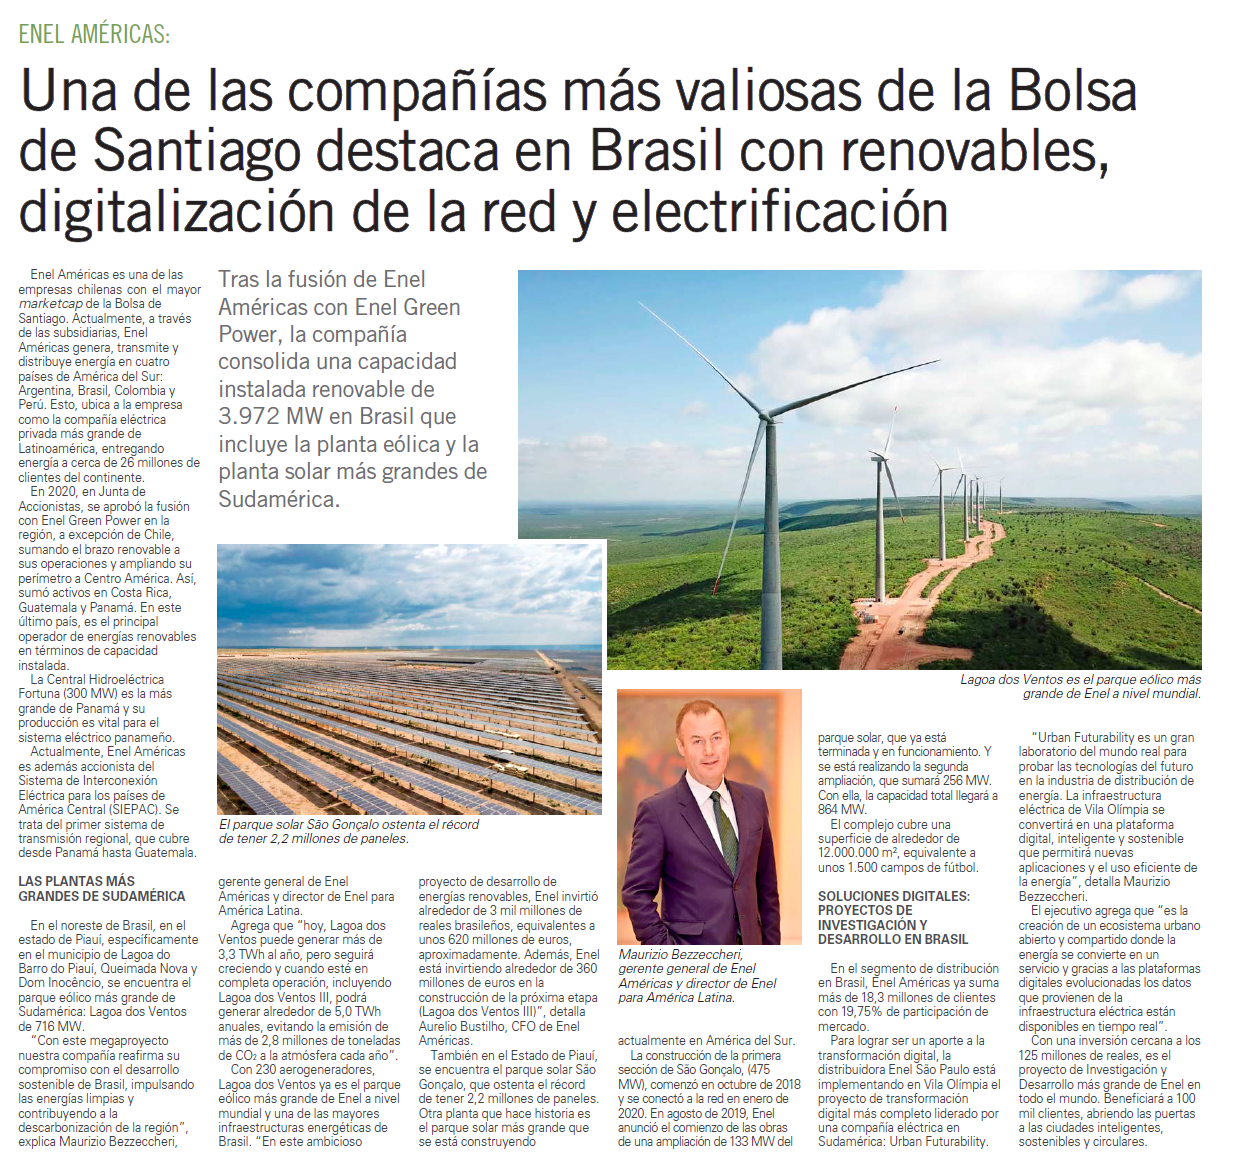 Enel Americas: One of the most valuable companies on the Santiago Stock  Exchange excels in Brazil with renewables, grid digitization and  electrification 